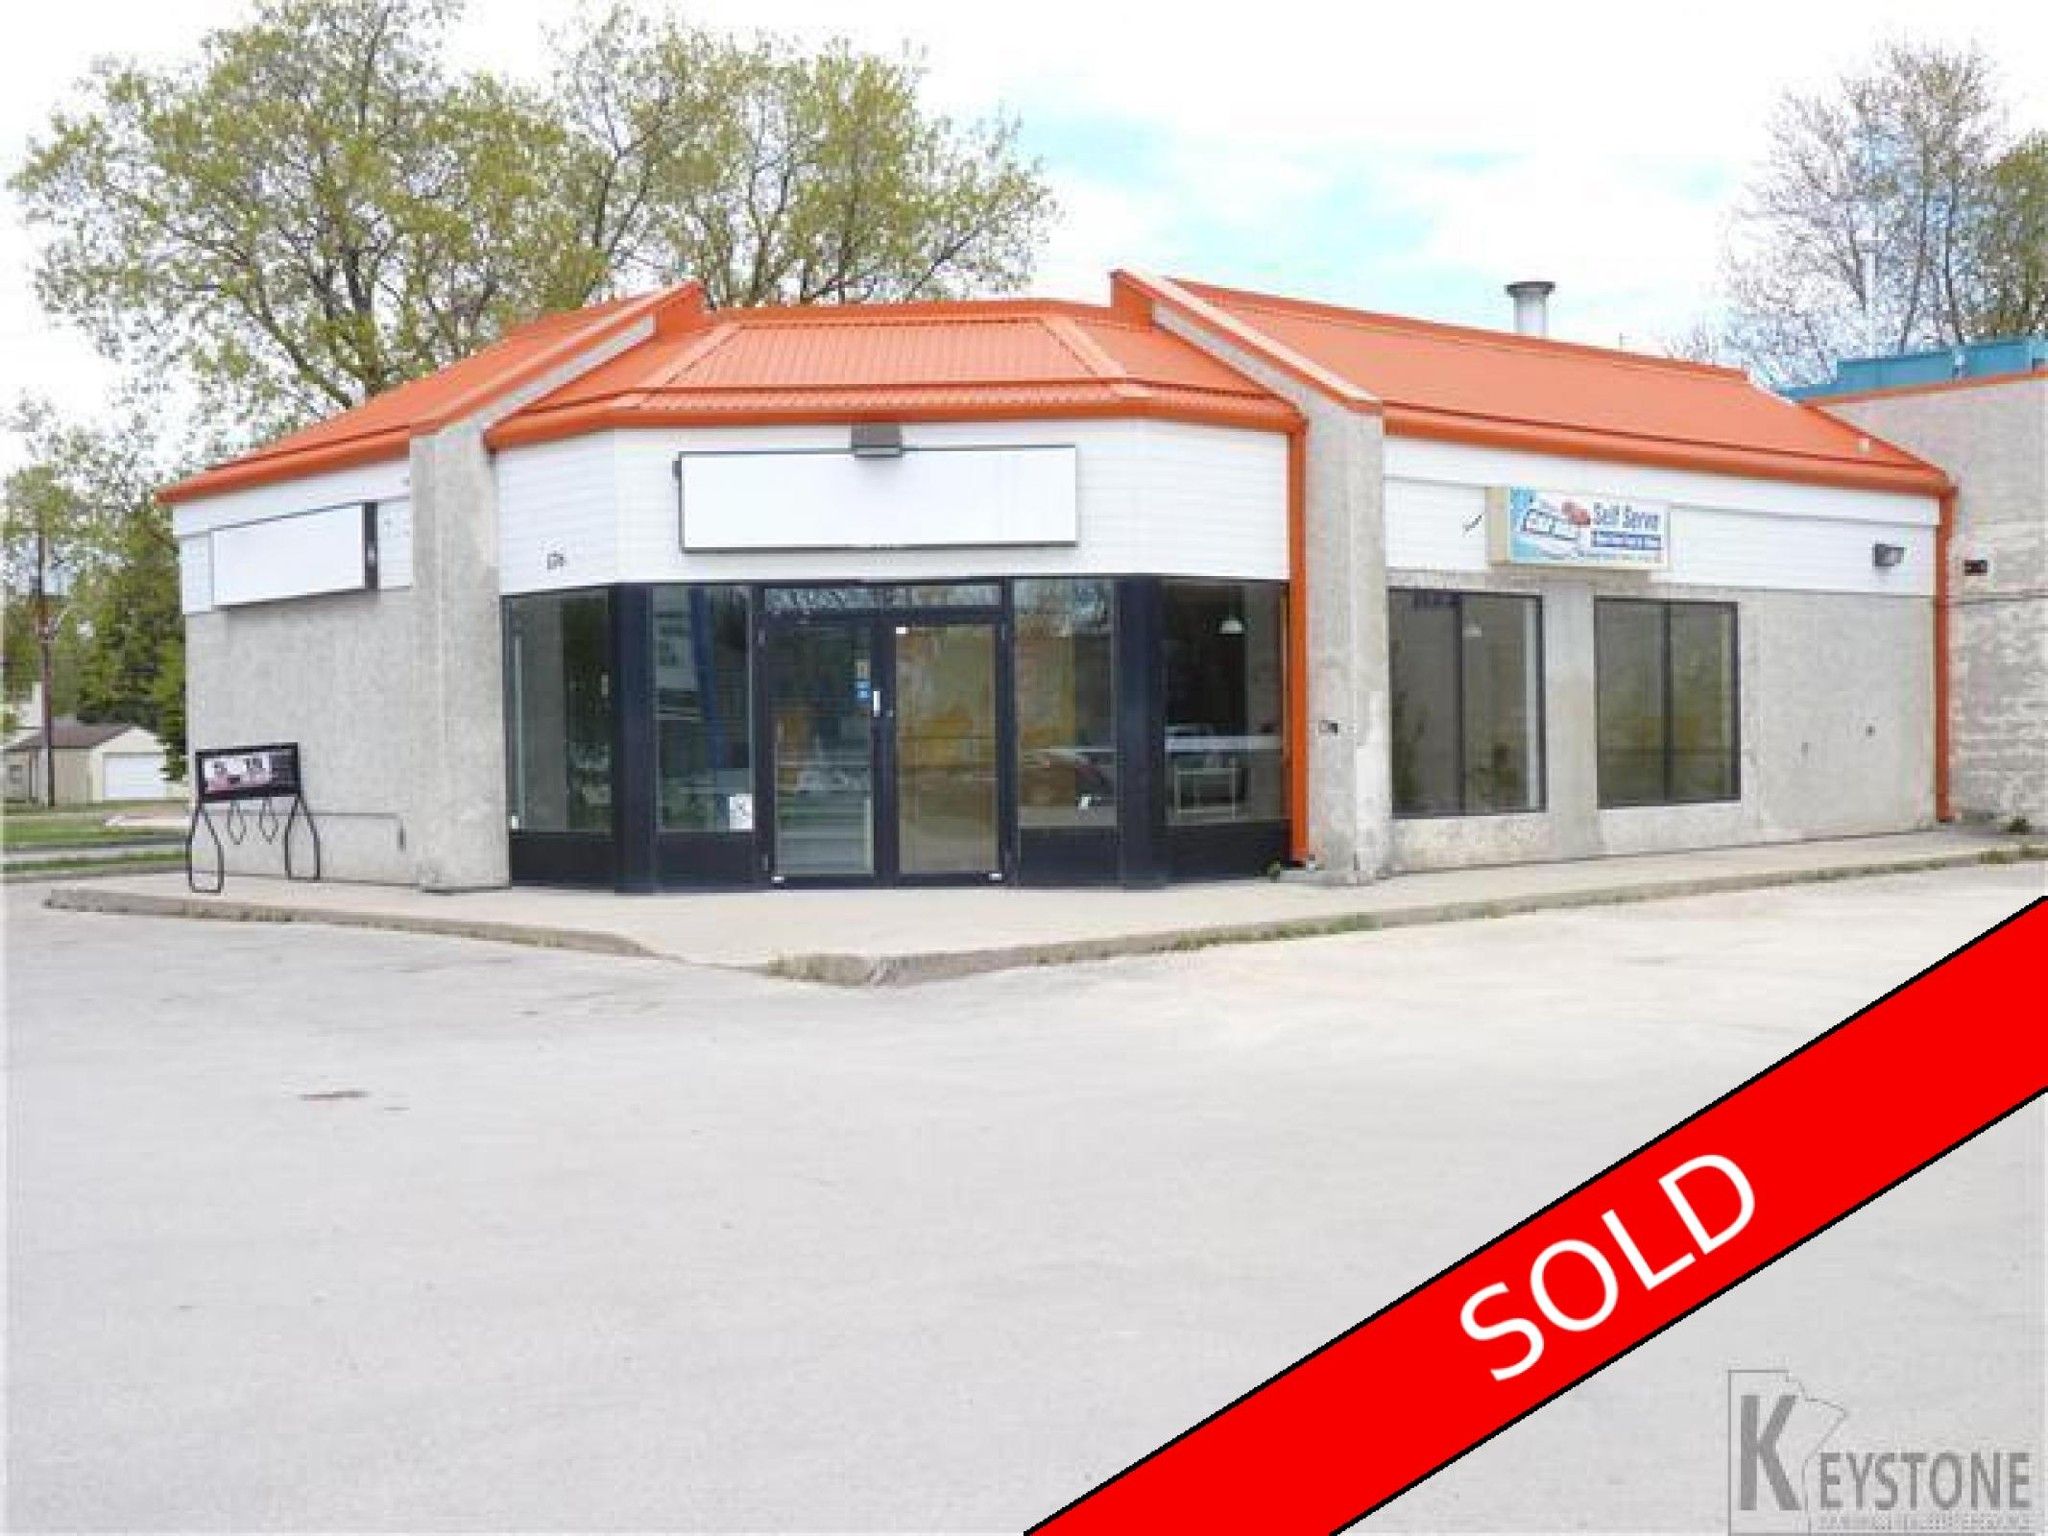 I have sold a property at 176 Main Street in Selkirk, MB r1a2s6
